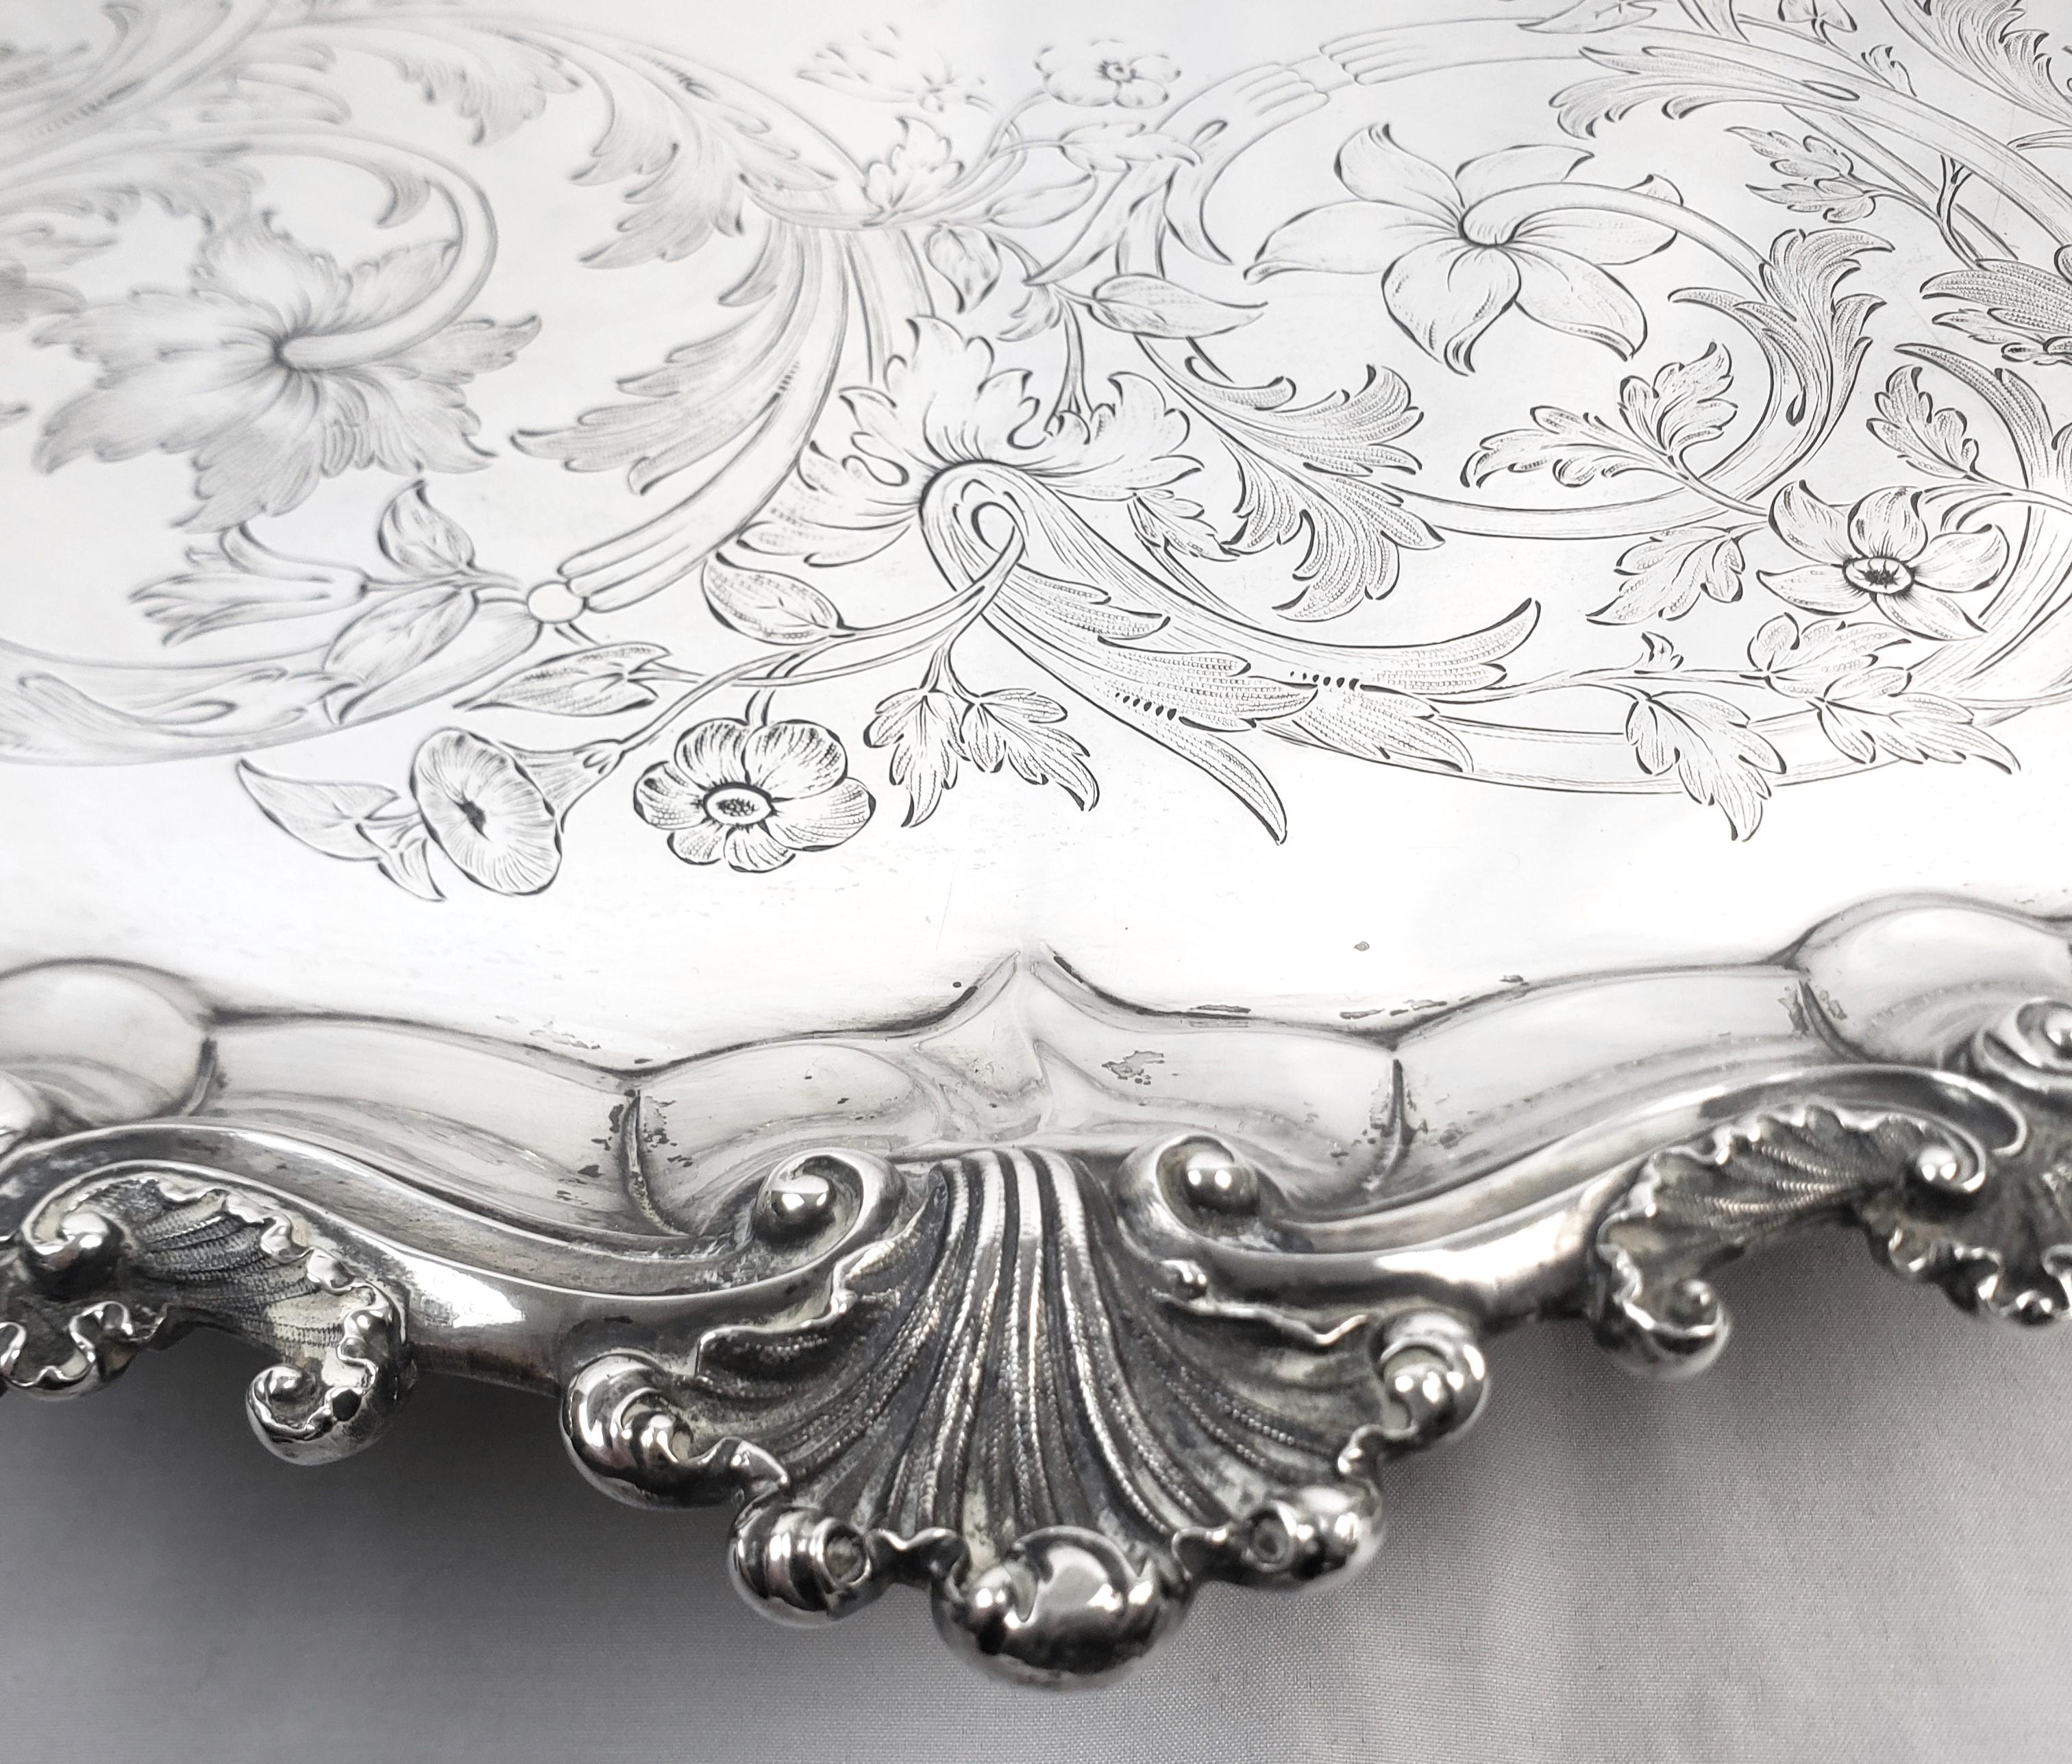 Huge Antique Sterling Silver Salver or Footed Tray with Ornate Floral Engraving For Sale 1